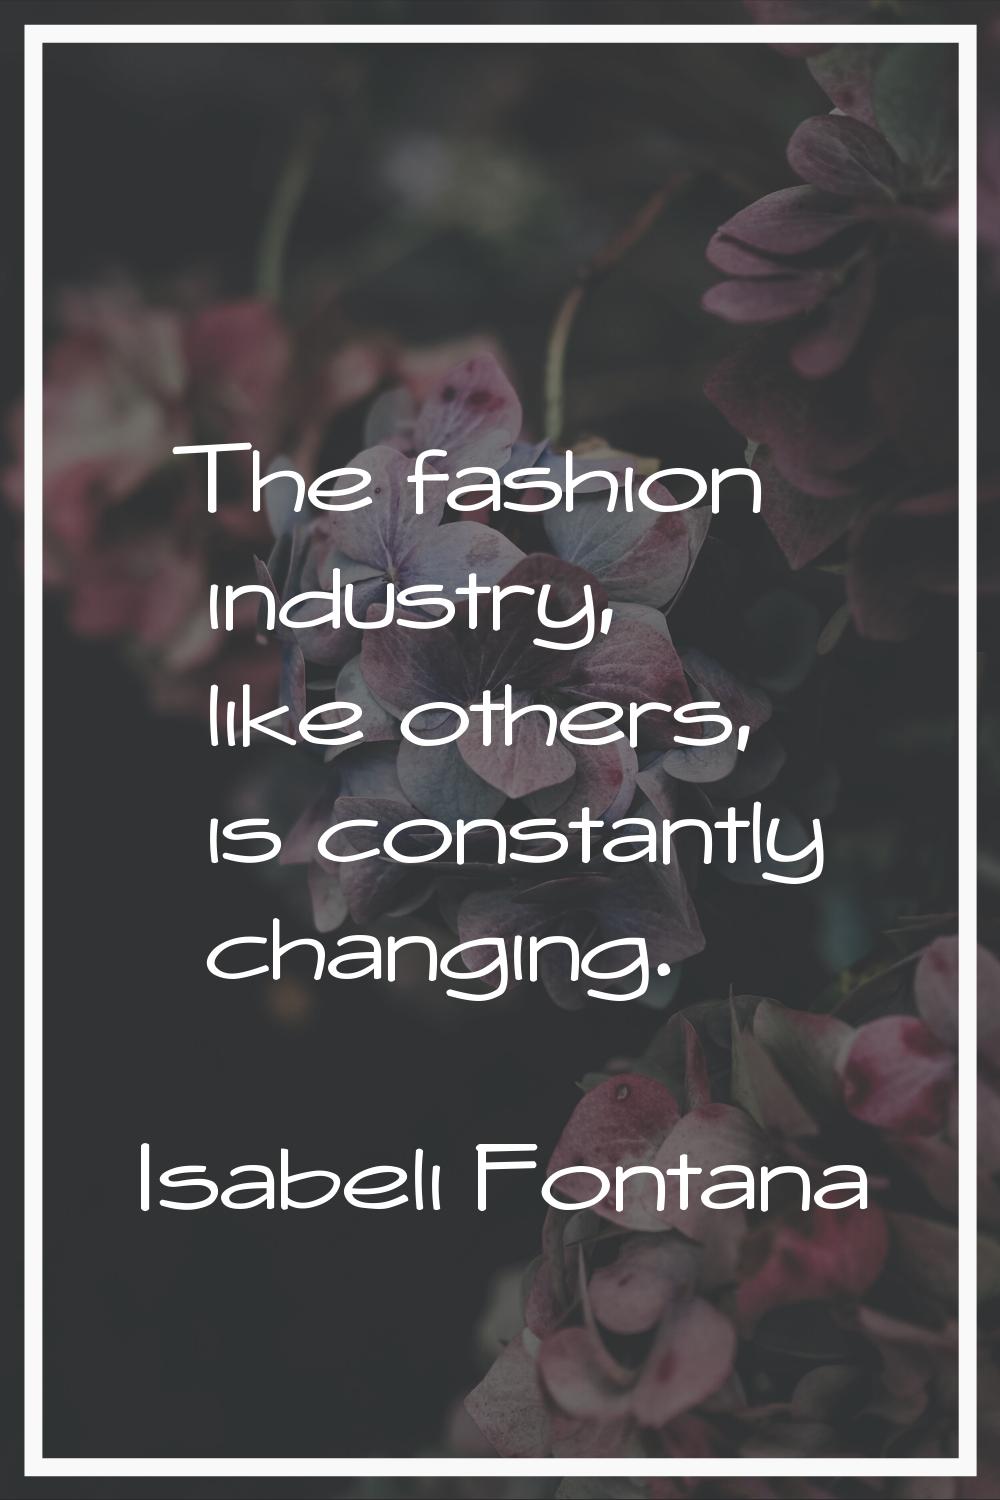 The fashion industry, like others, is constantly changing.